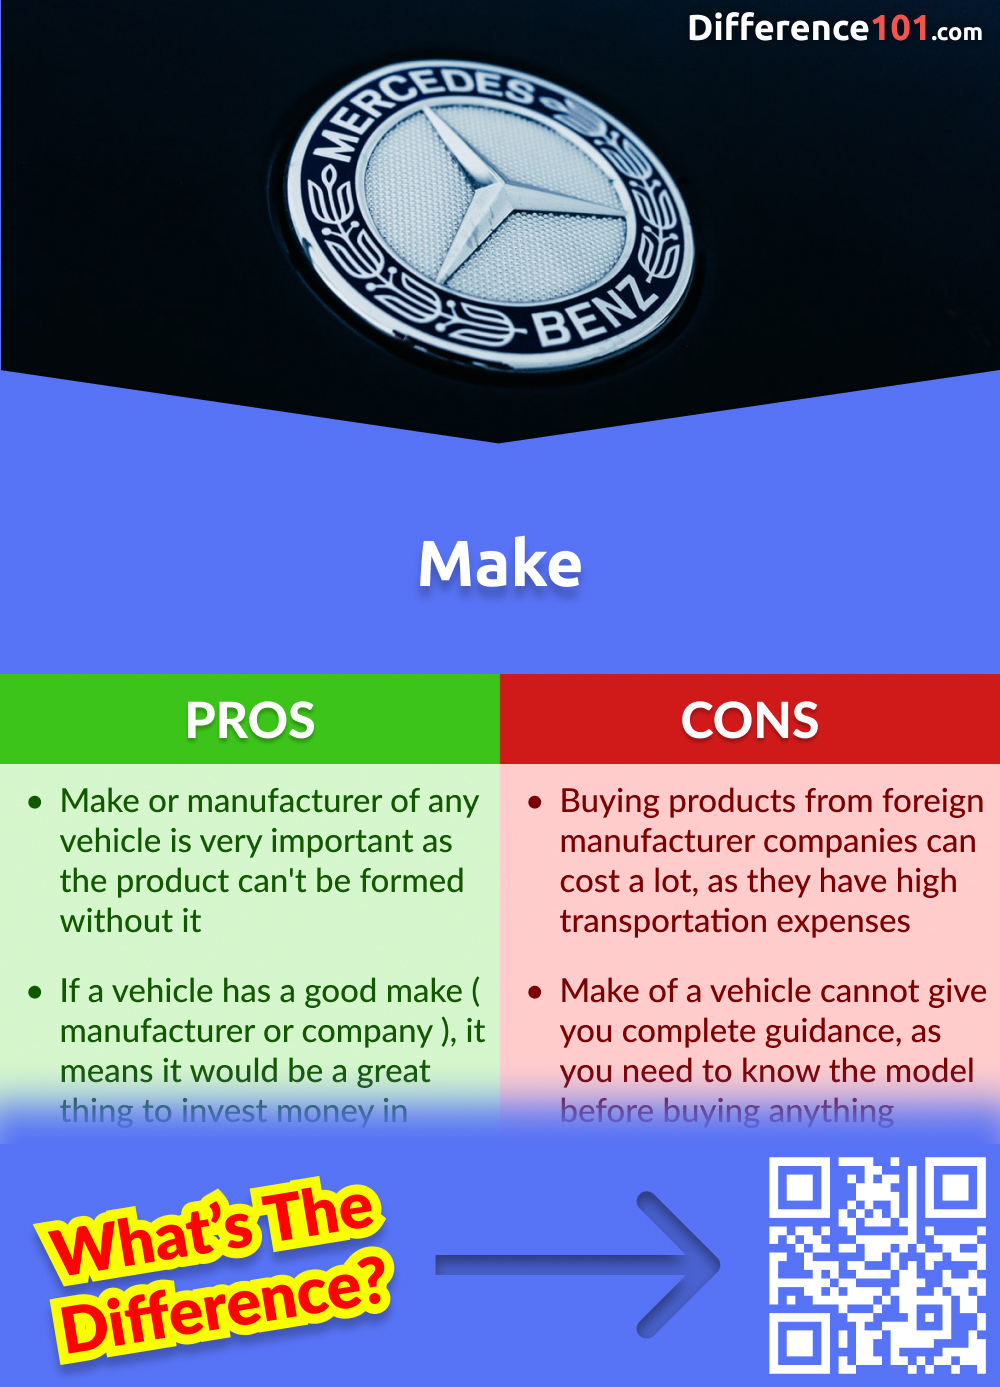 Pros and cons of Make